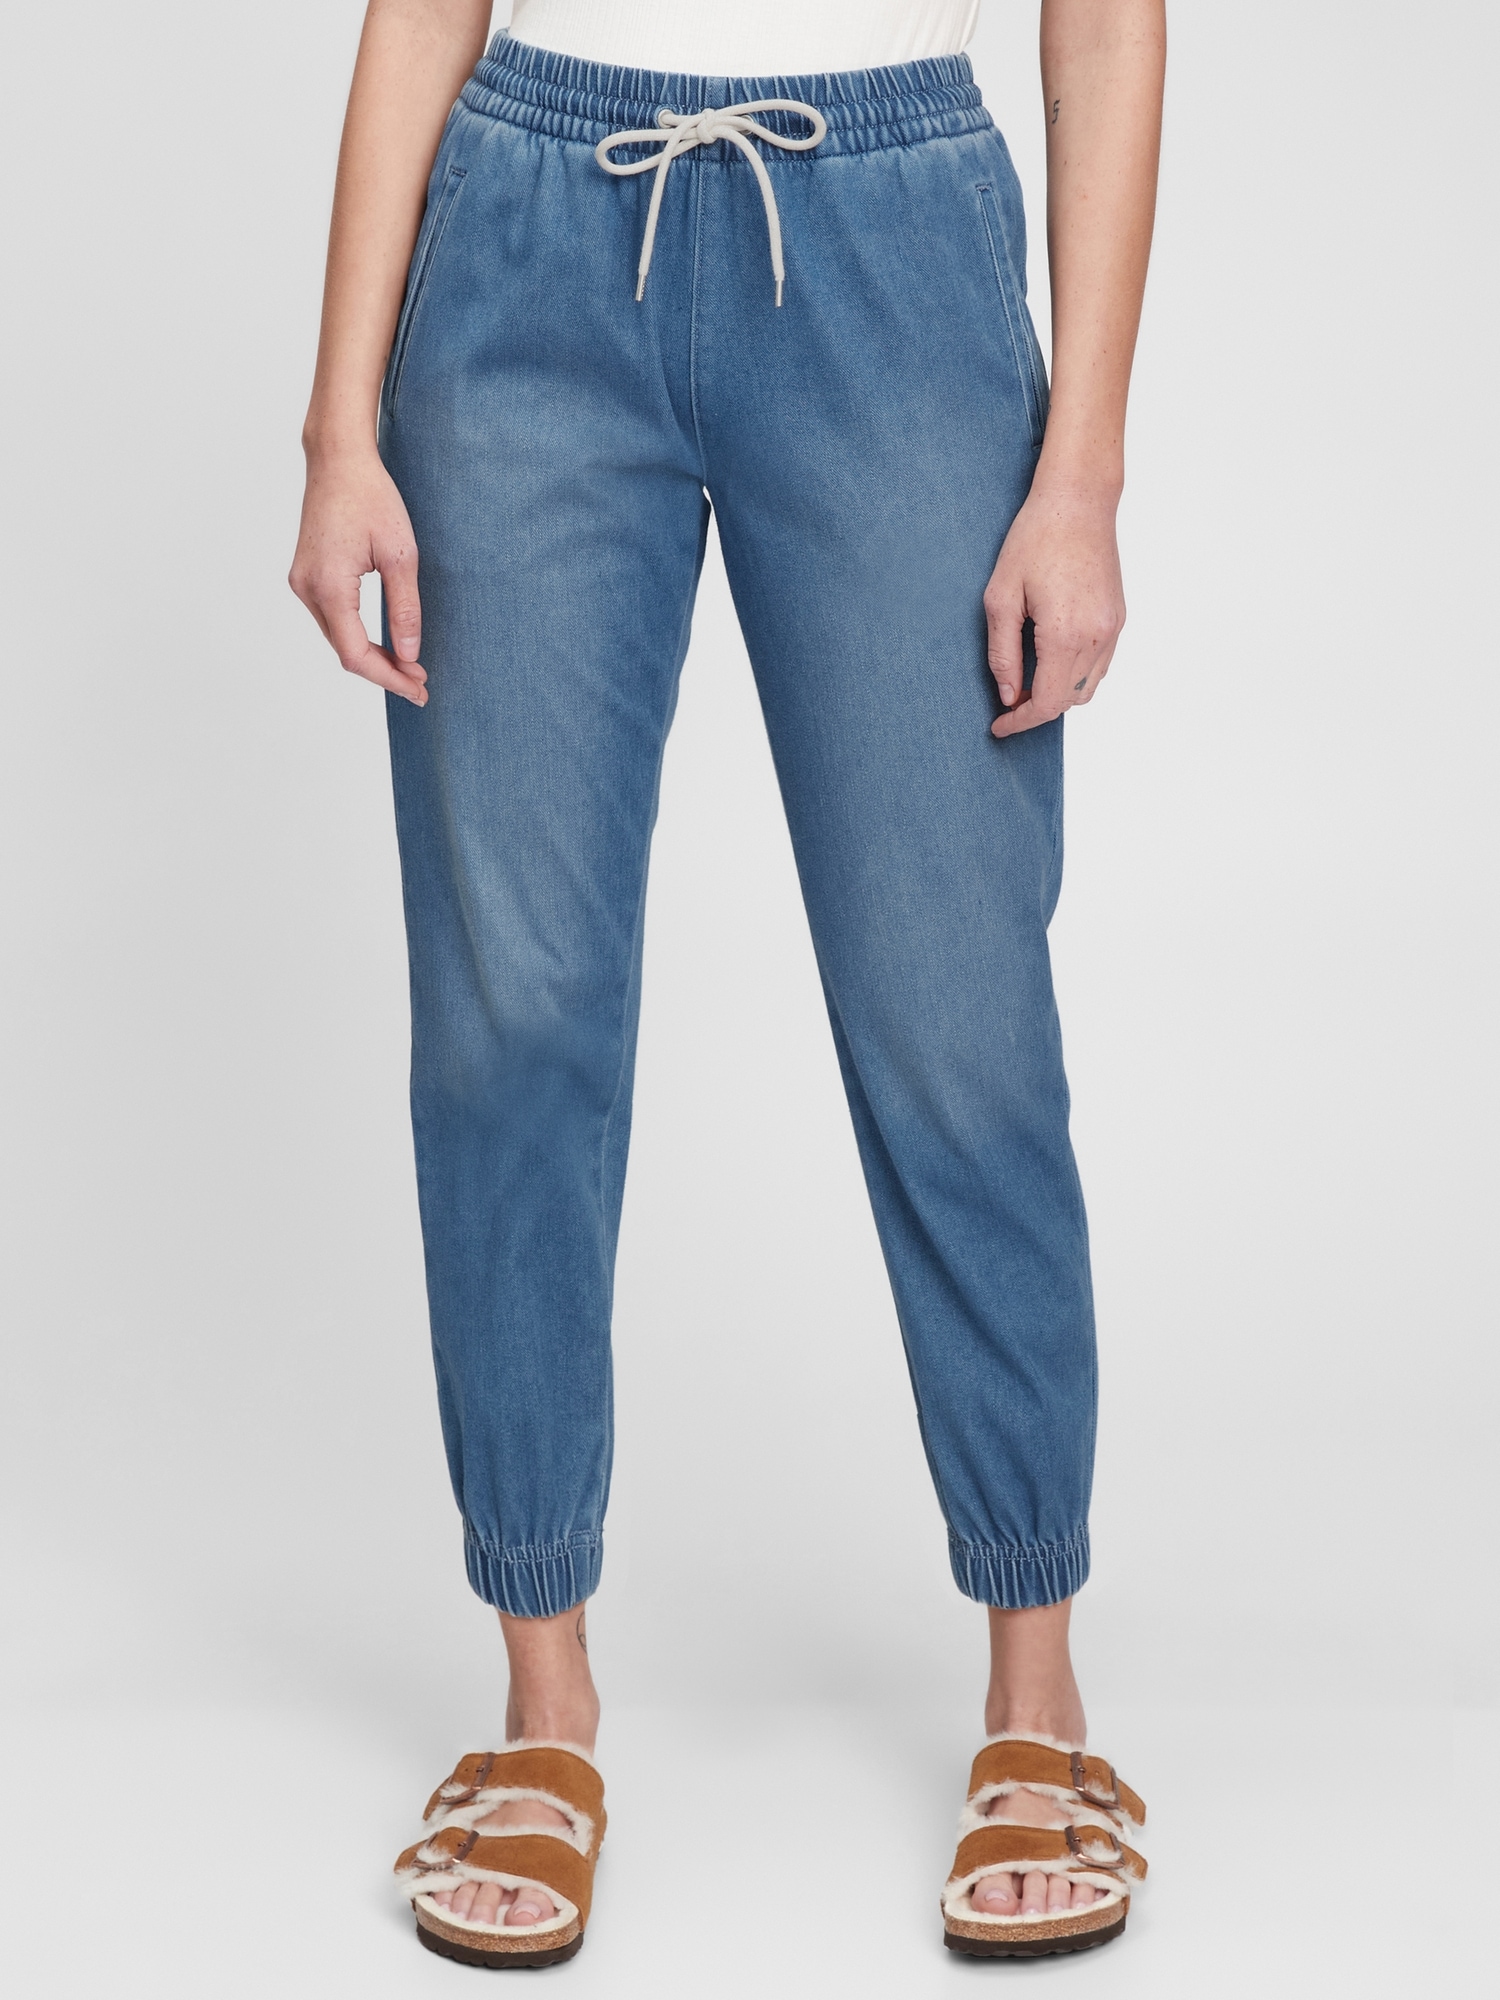 Stylish Jogger Jeans For Women Online with 60% Off - Buy Now